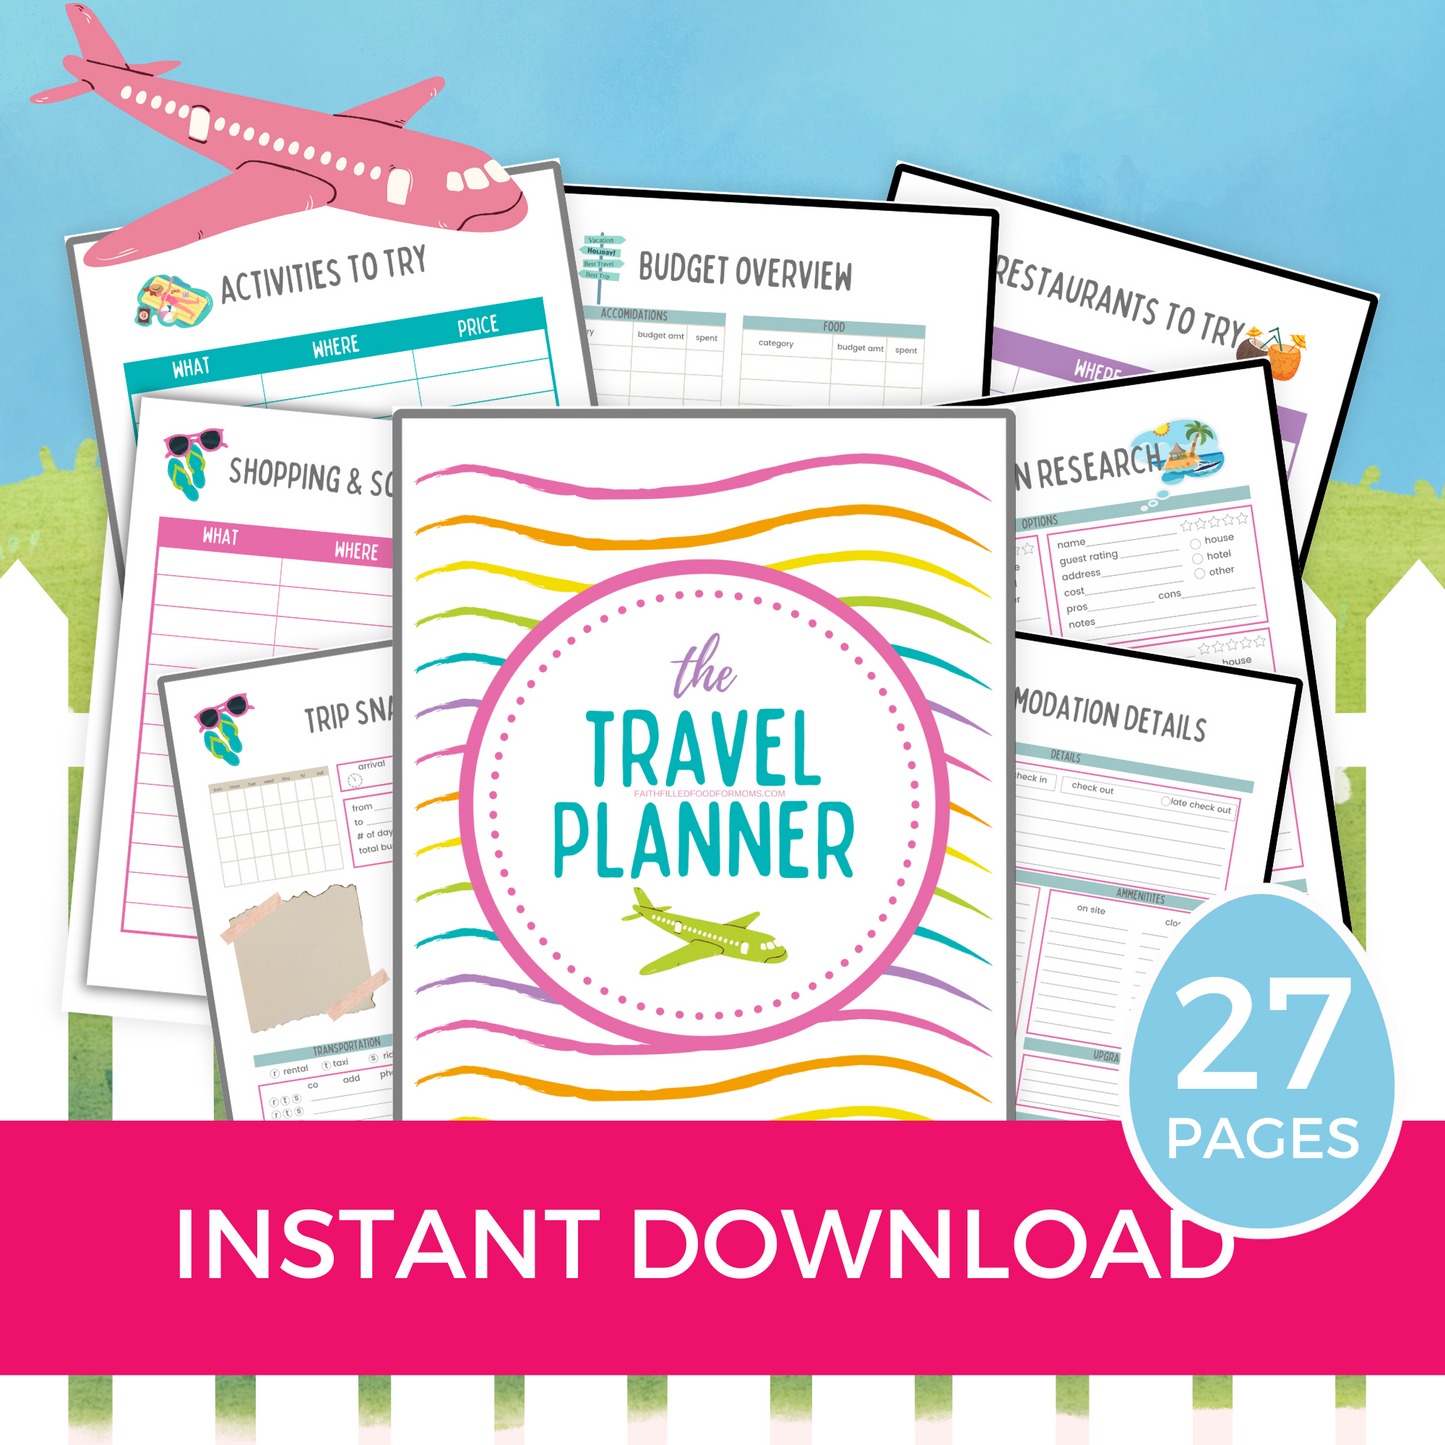 Travel Planner for the Perfect Vacay!